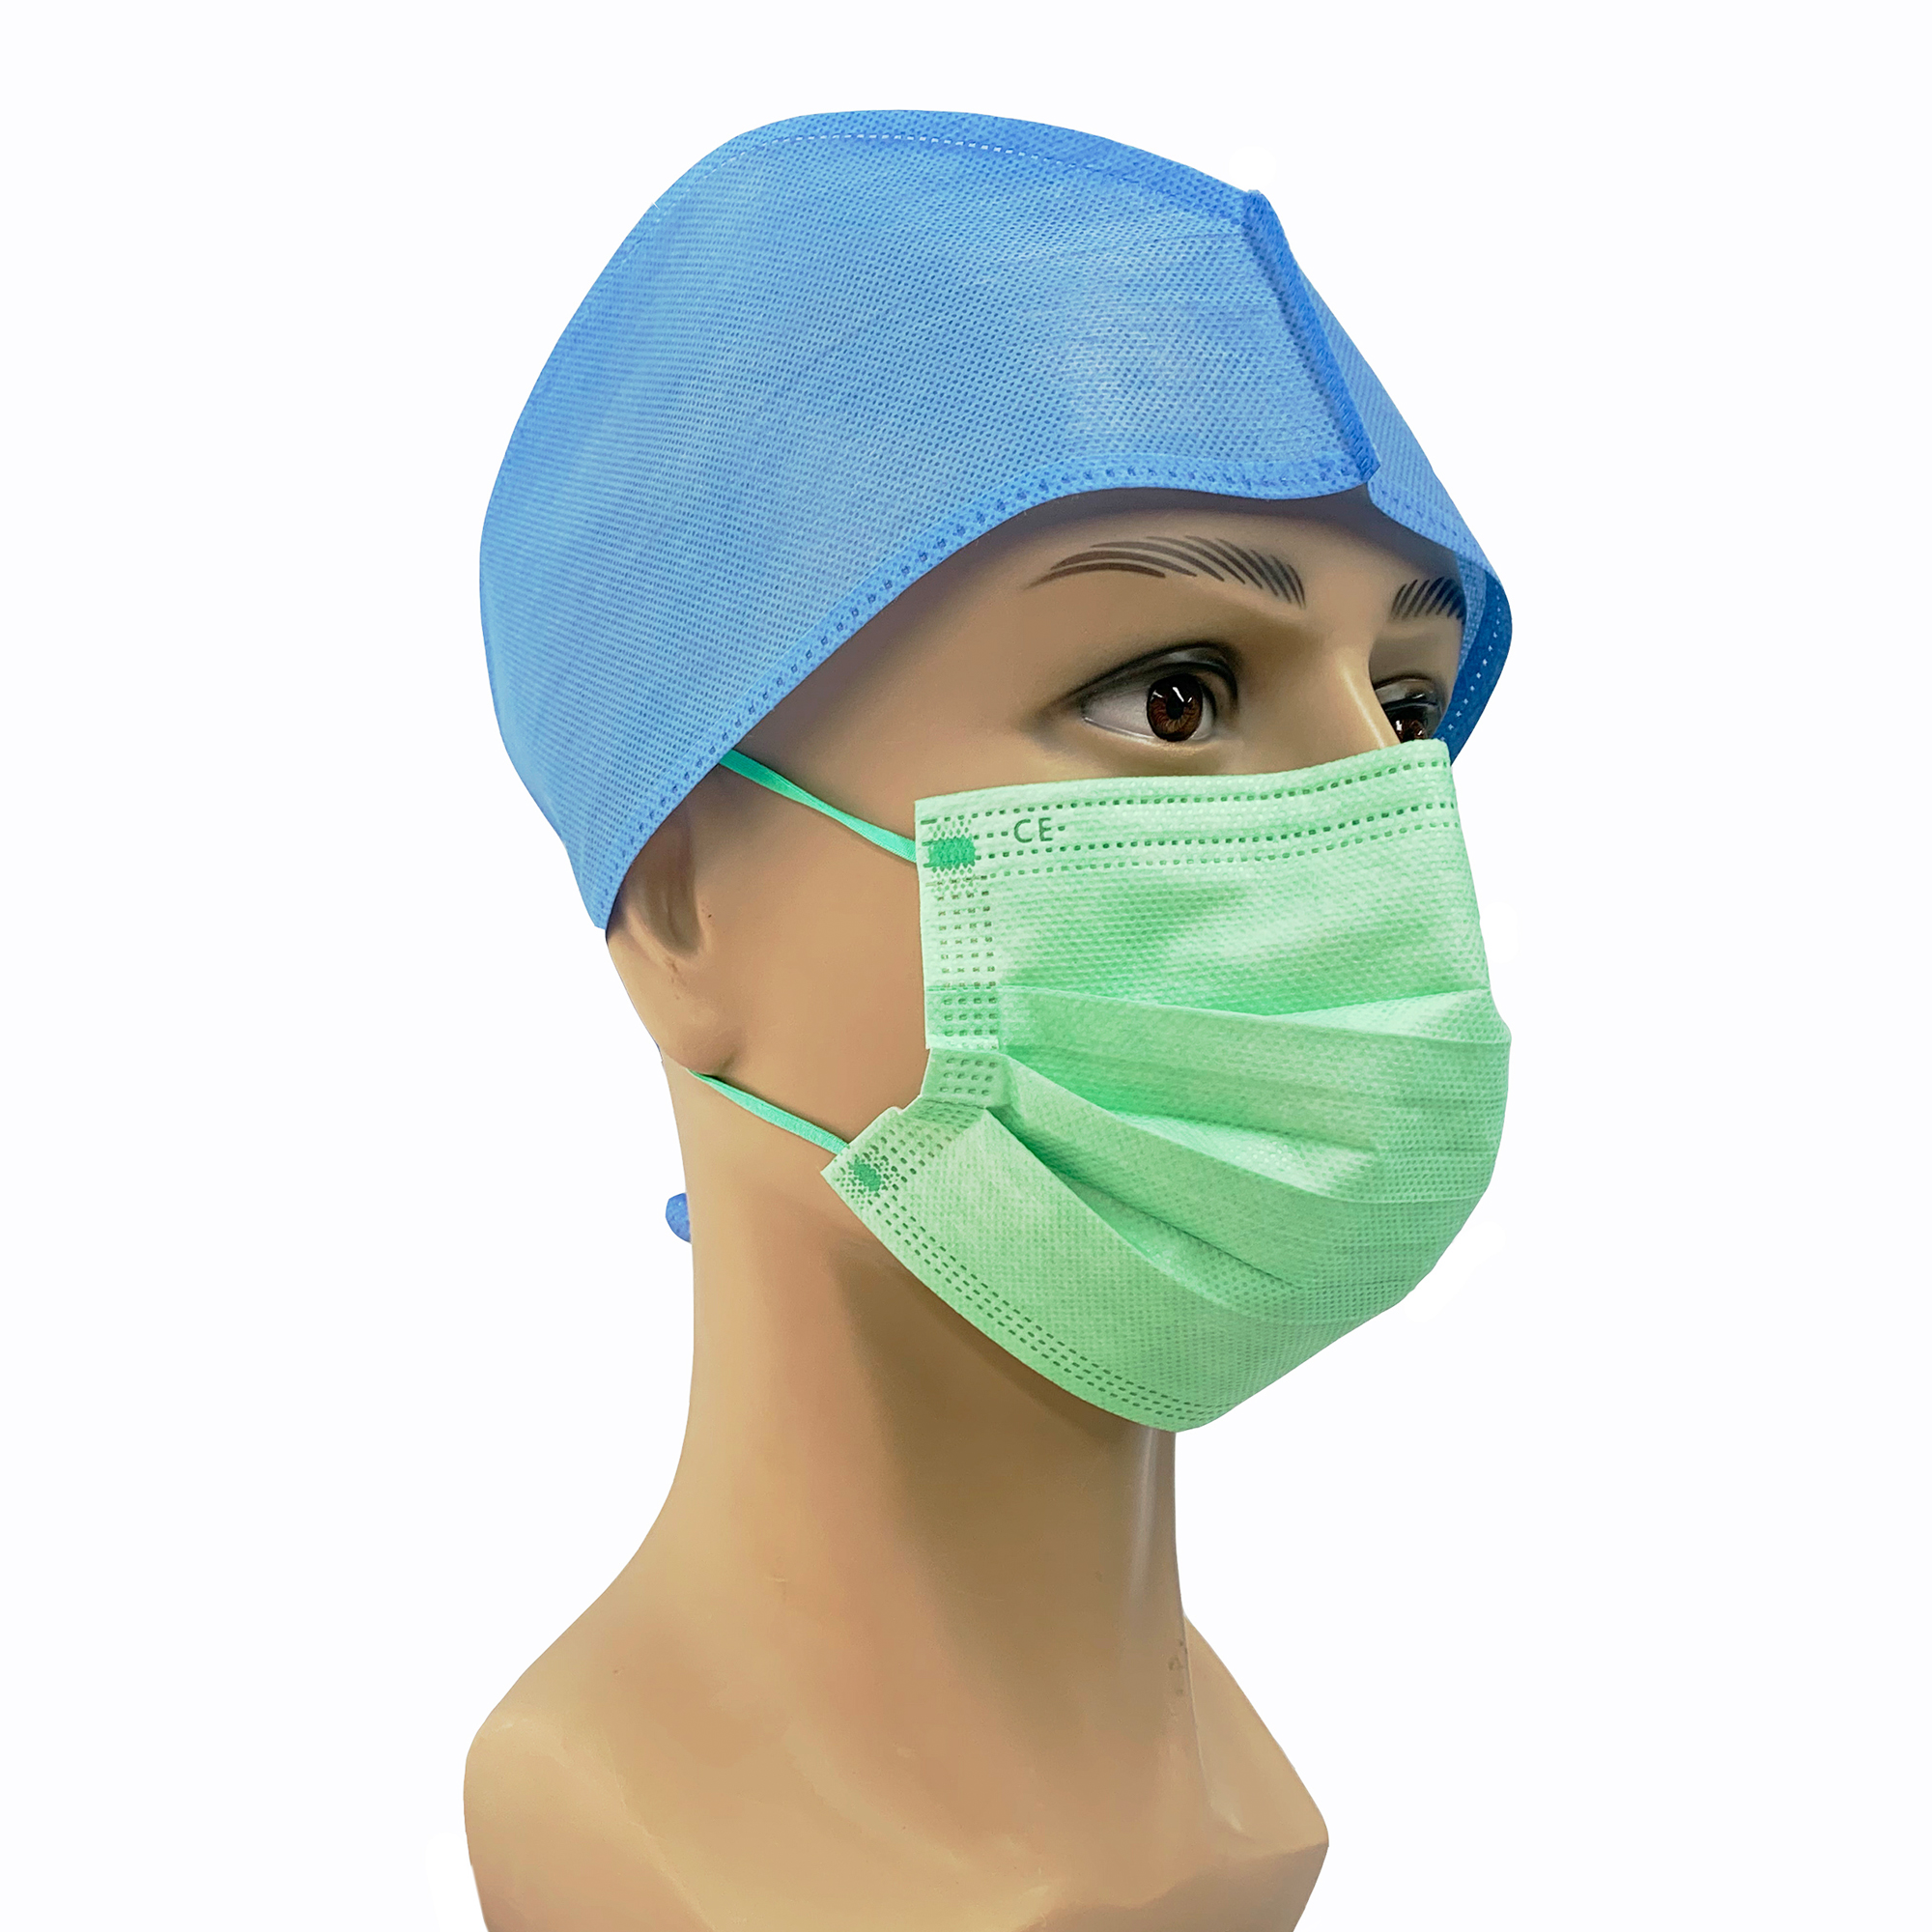 ASTM F2100 LEVEL 3 test report disposable medical face mask 